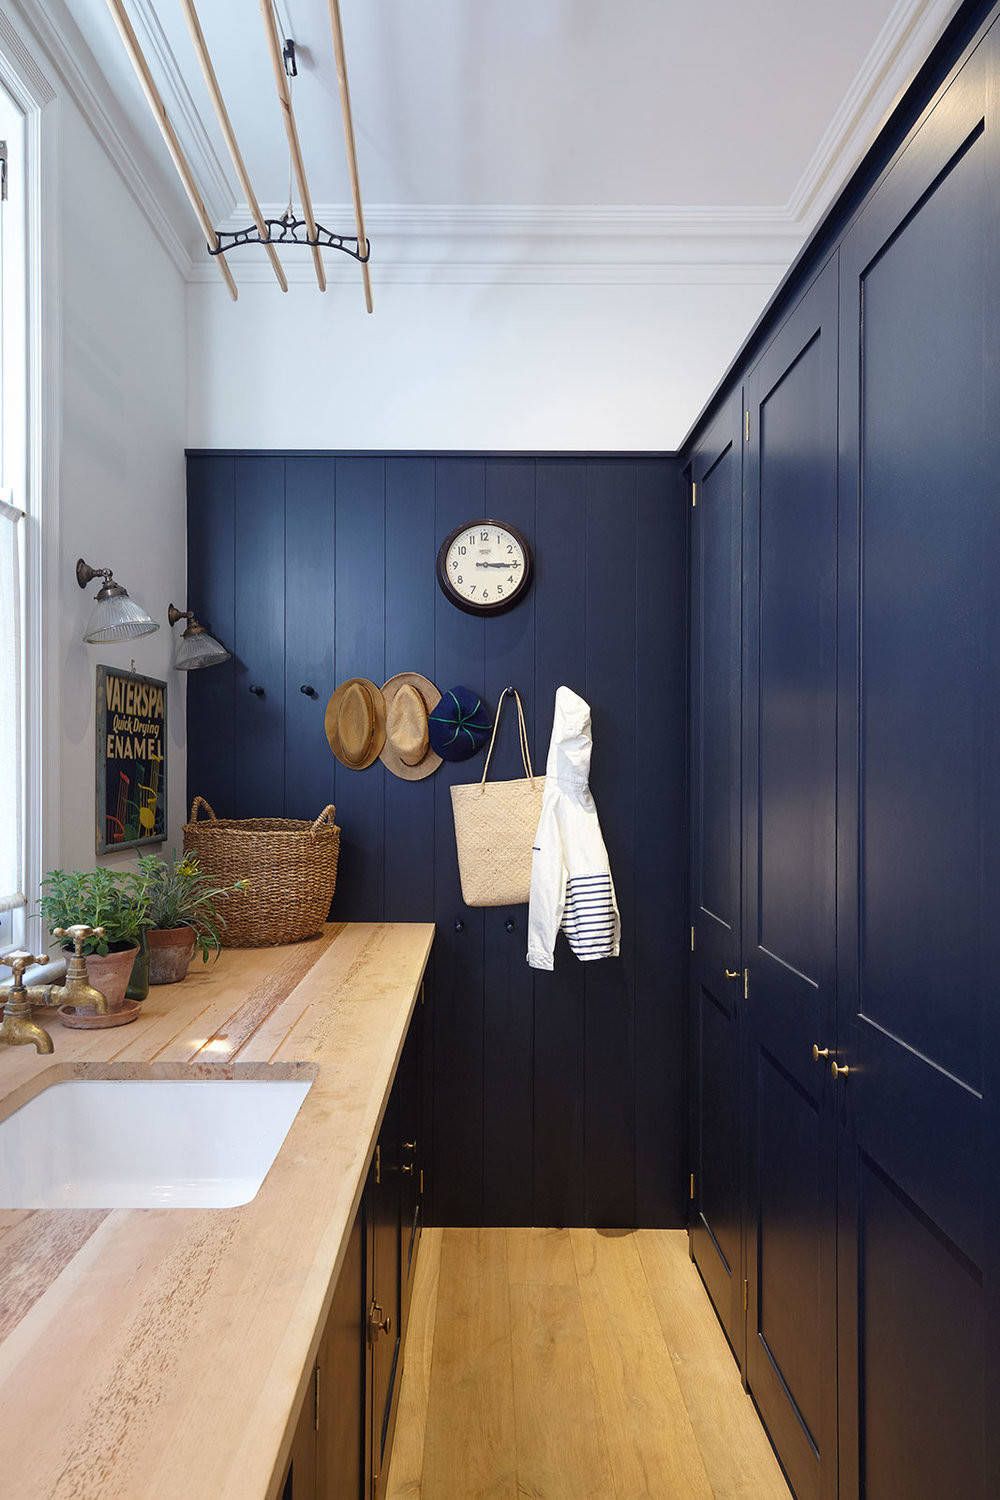 deep blue cabinets flank a galley style laundry room